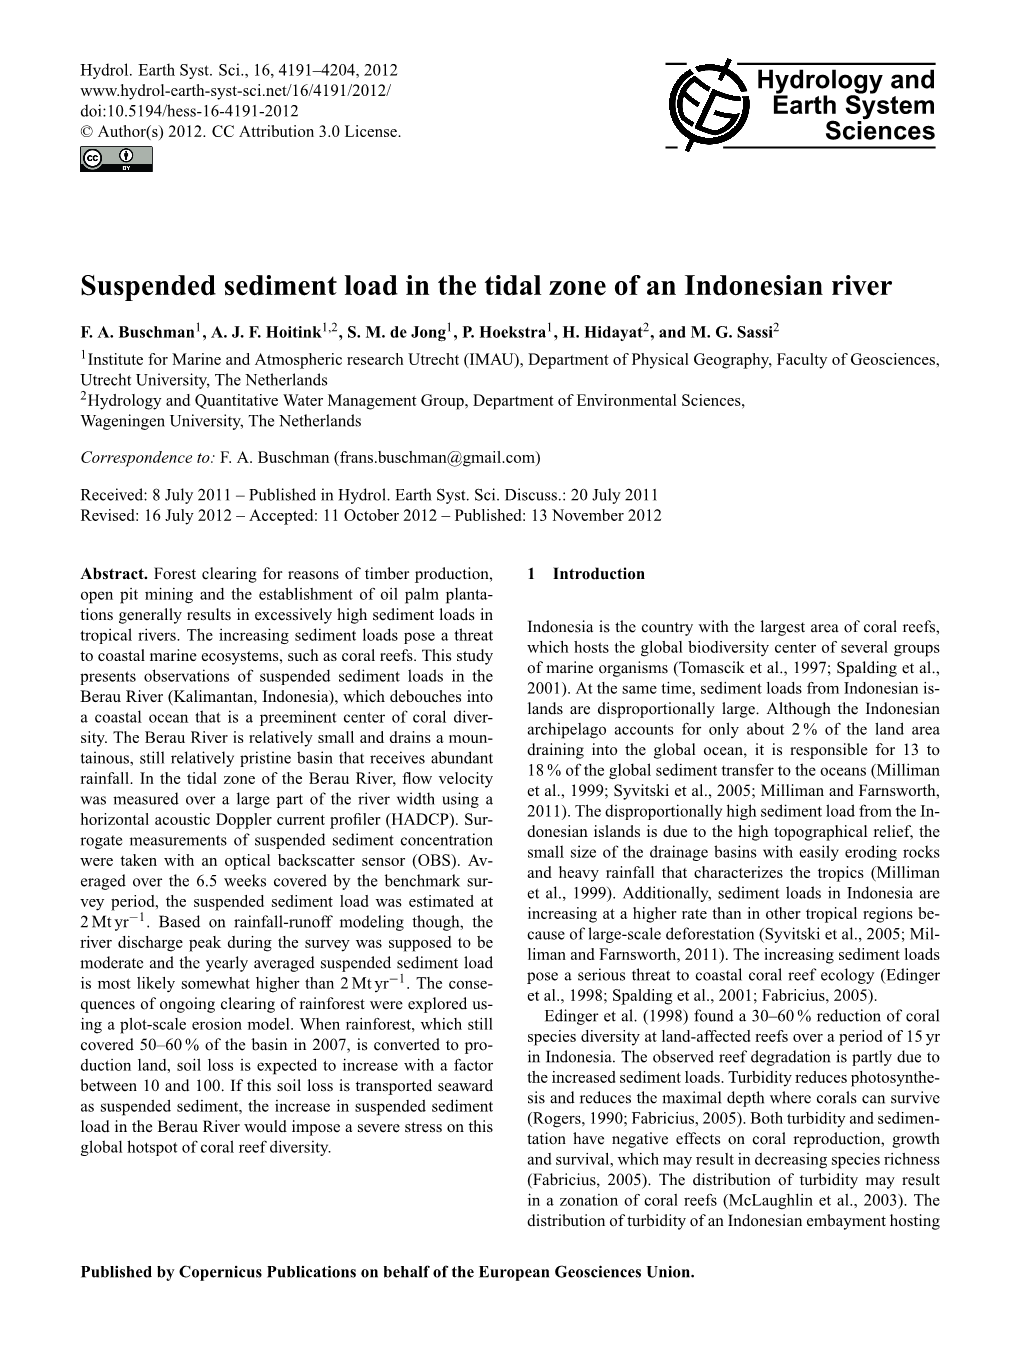 Suspended Sediment Load in the Tidal Zone of an Indonesian River